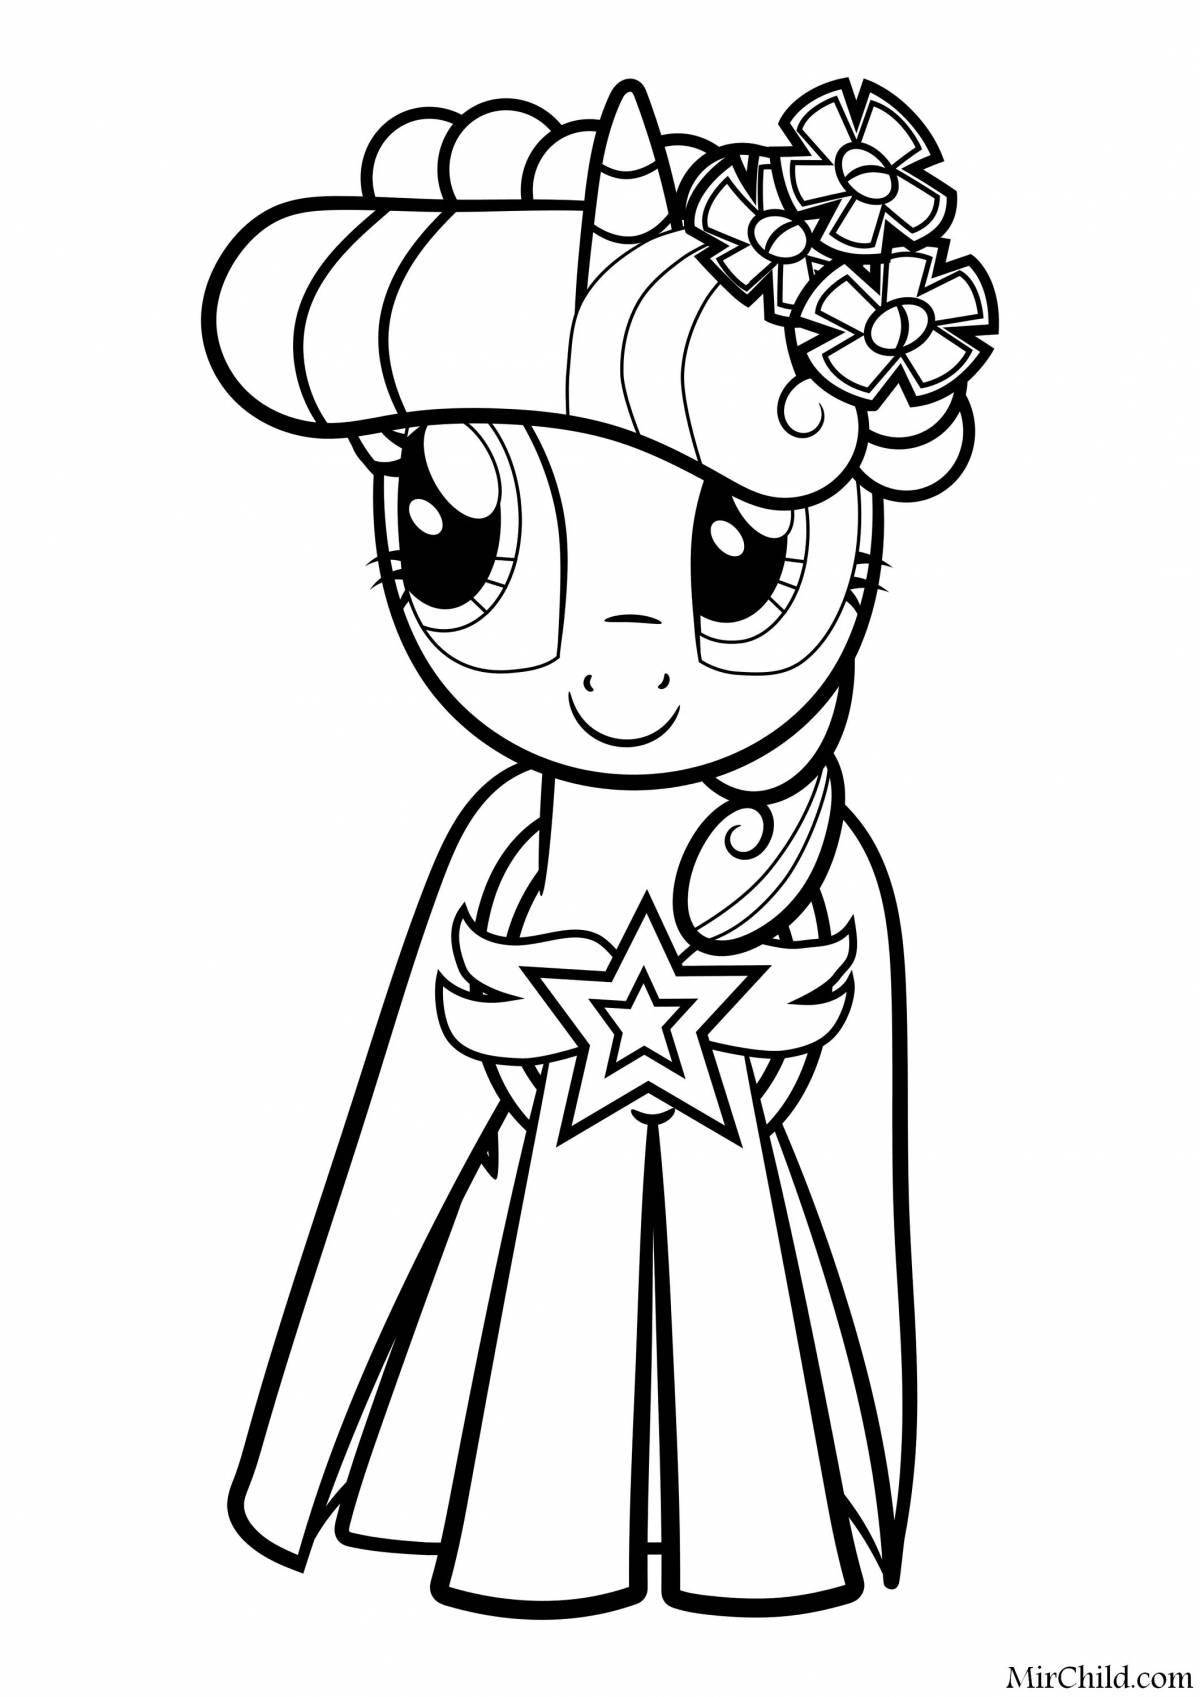 Sparkle man pony coloring page